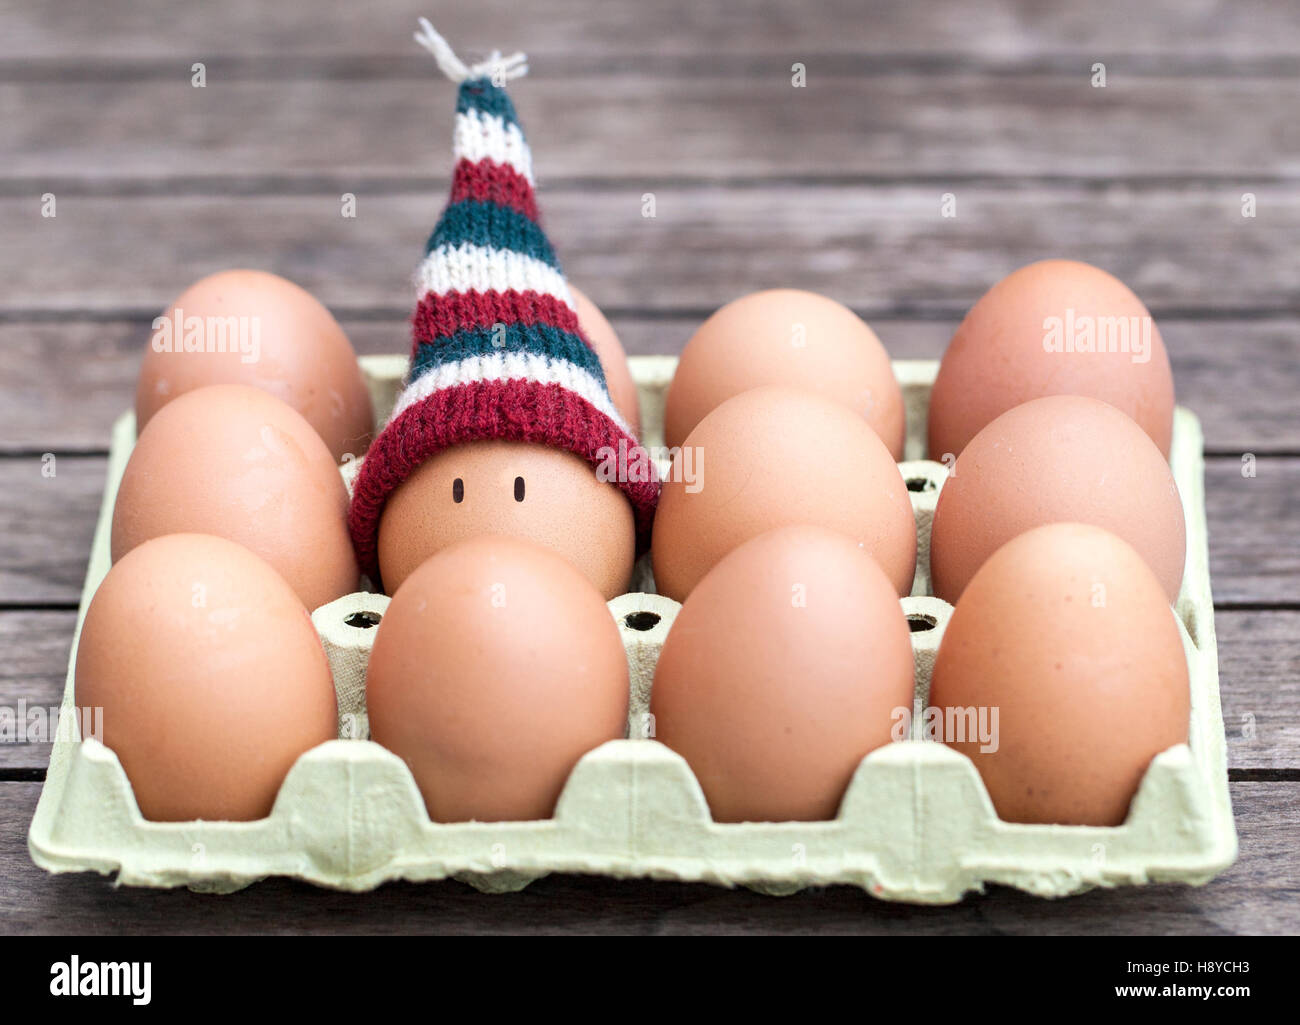 Egg wearing a knitted hat souronded by brown eggs. Stock Photo